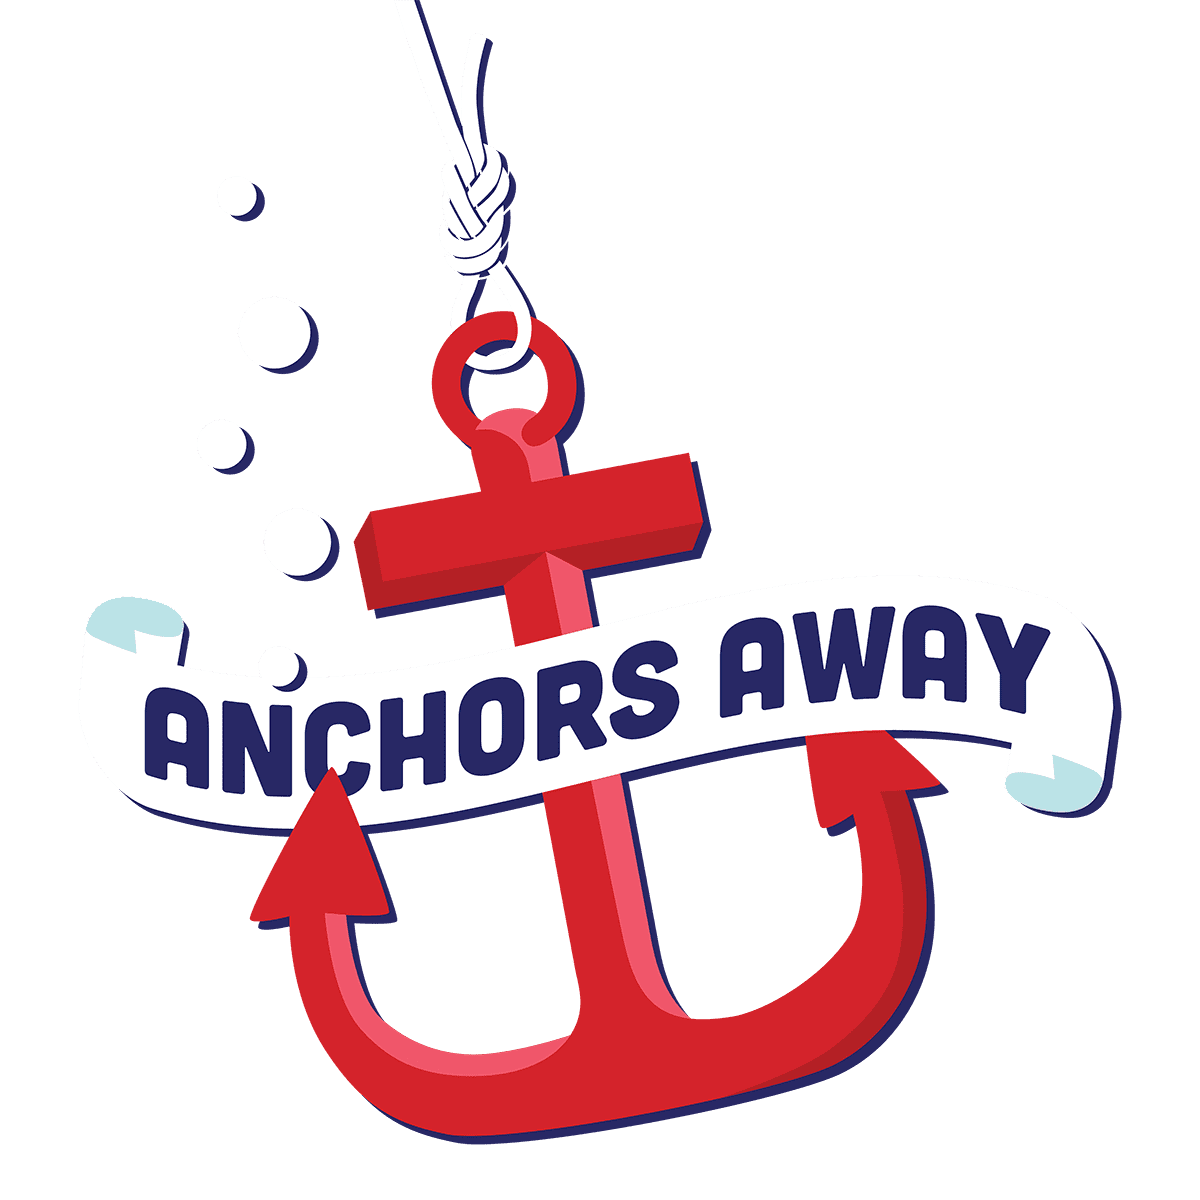 A red anchor with a rope and the text "Anchors Away" below it, symbolizing adventure and fun, perfect for promoting pontoon rentals in Florida.